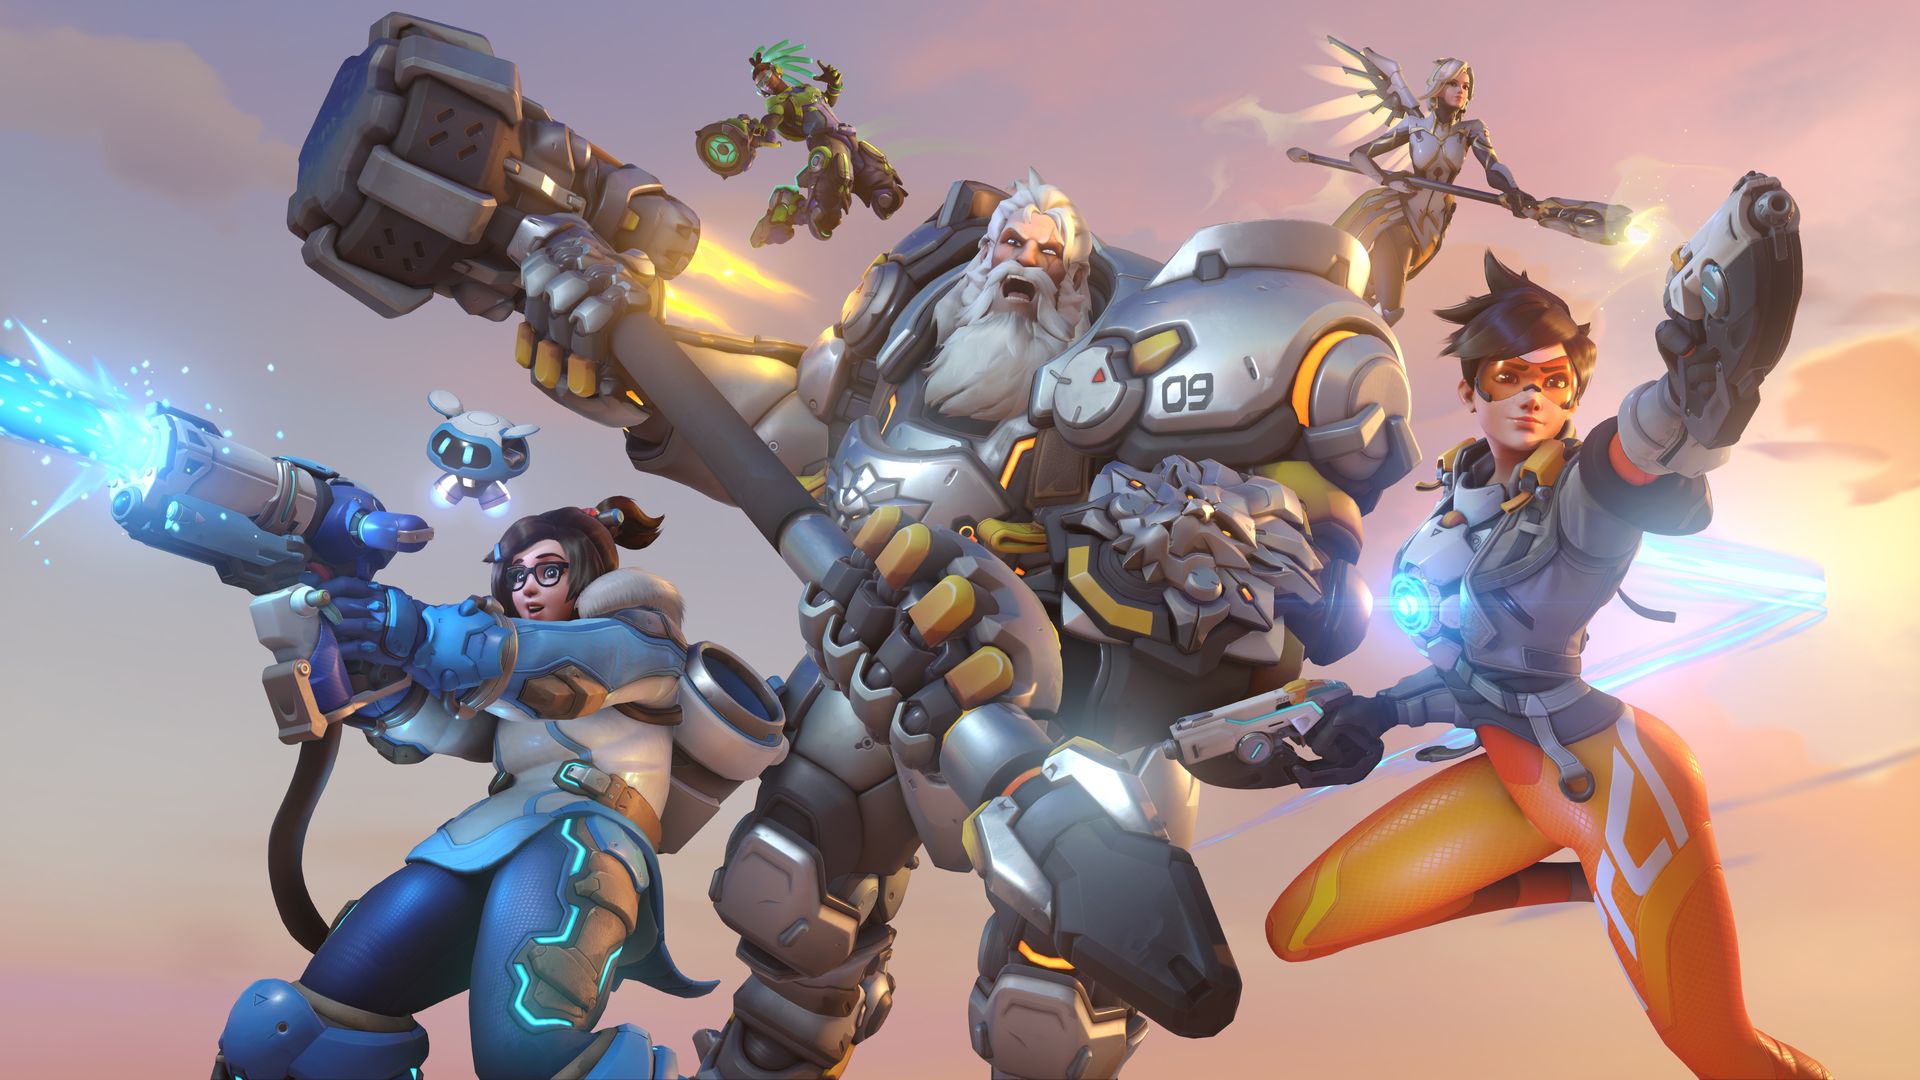 Overwatch Mythic skins and more revealed during live stream event